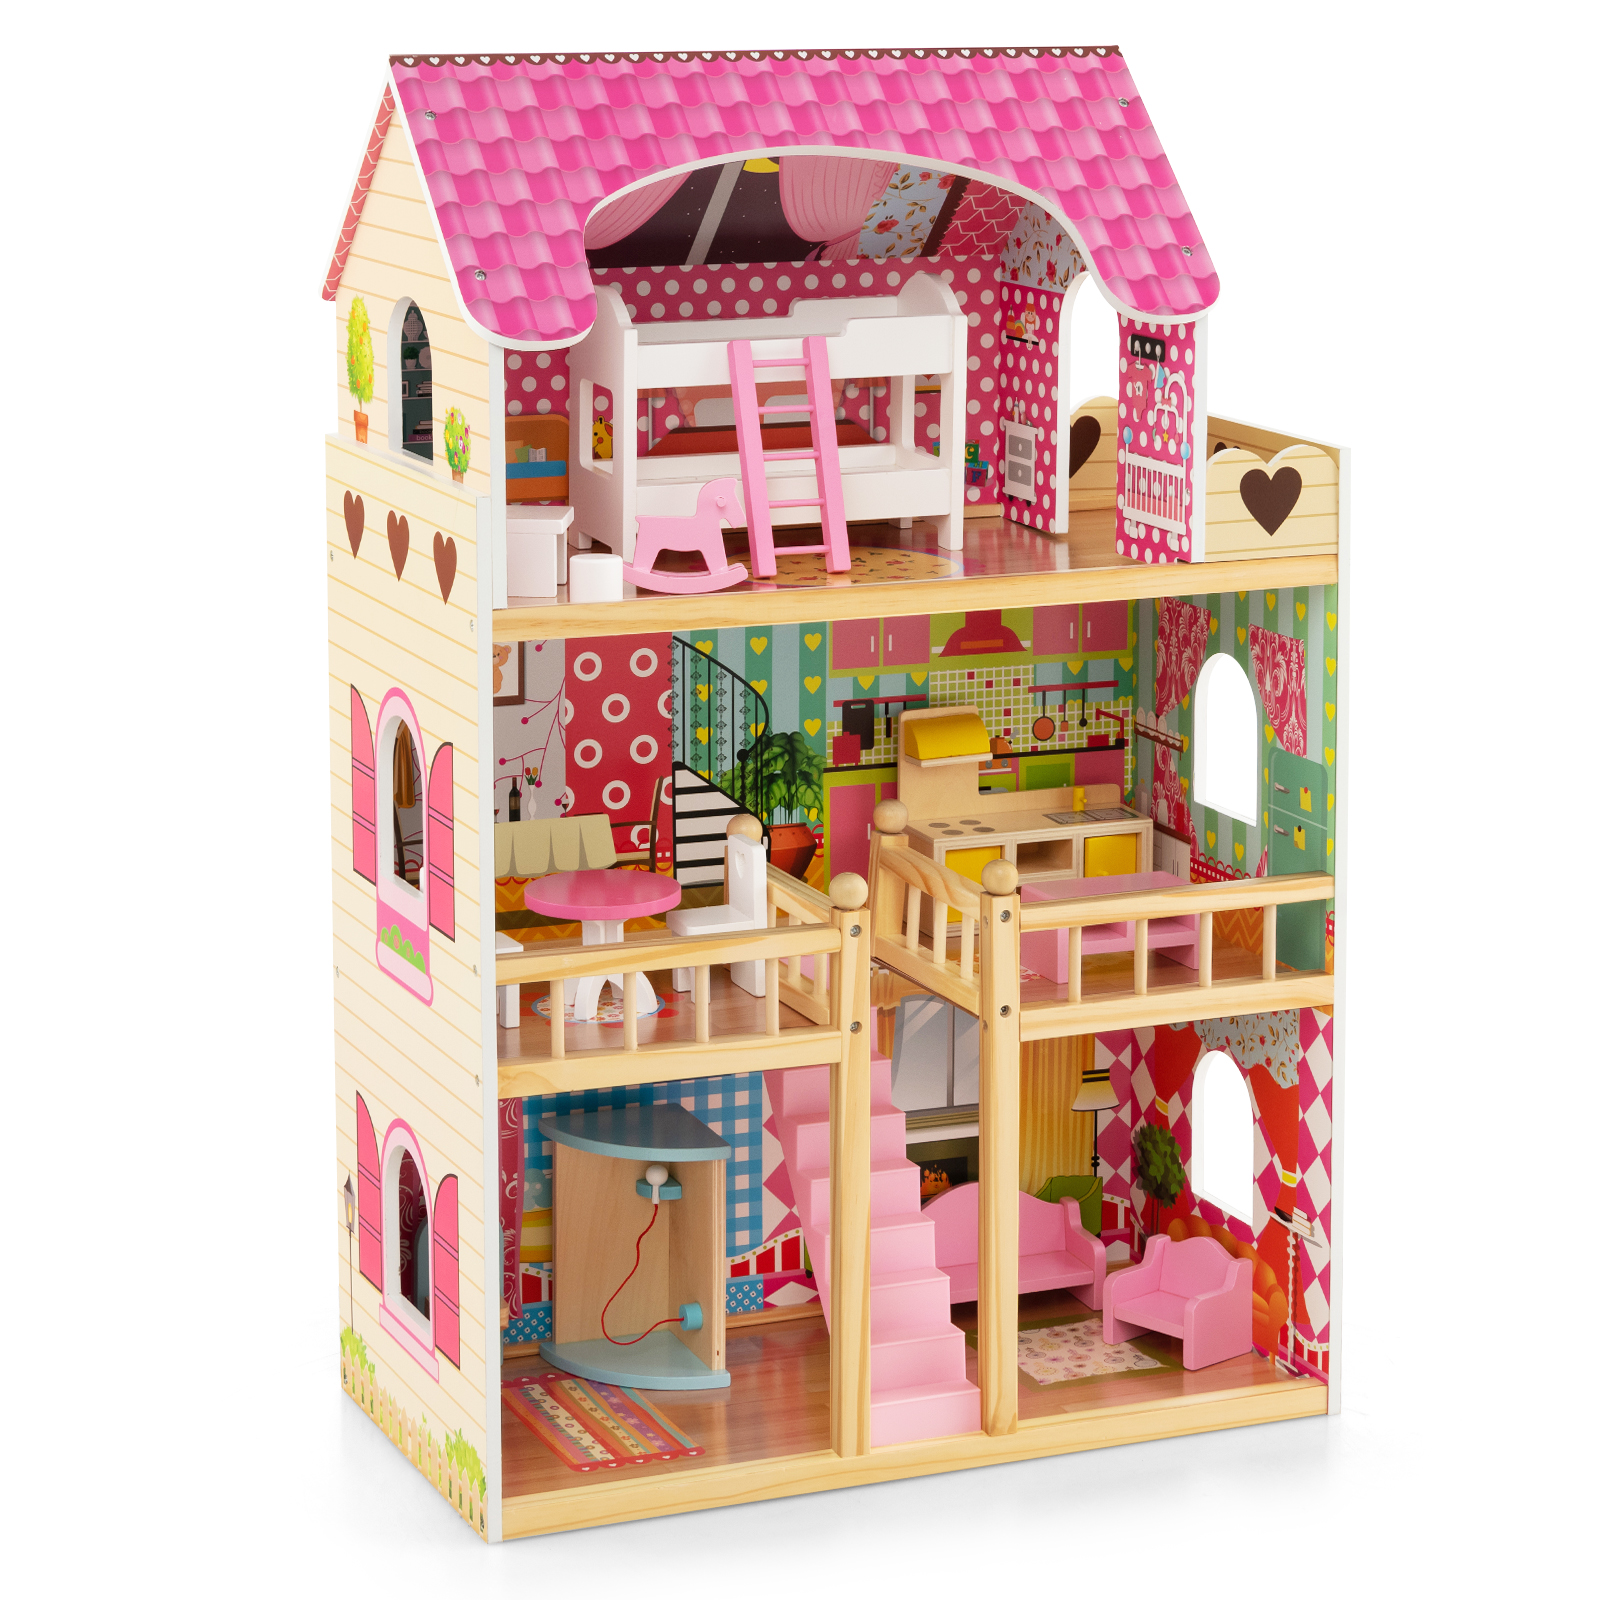 Wooden DIY Pretend Dream House for Children Over 3 Years Old-Pink